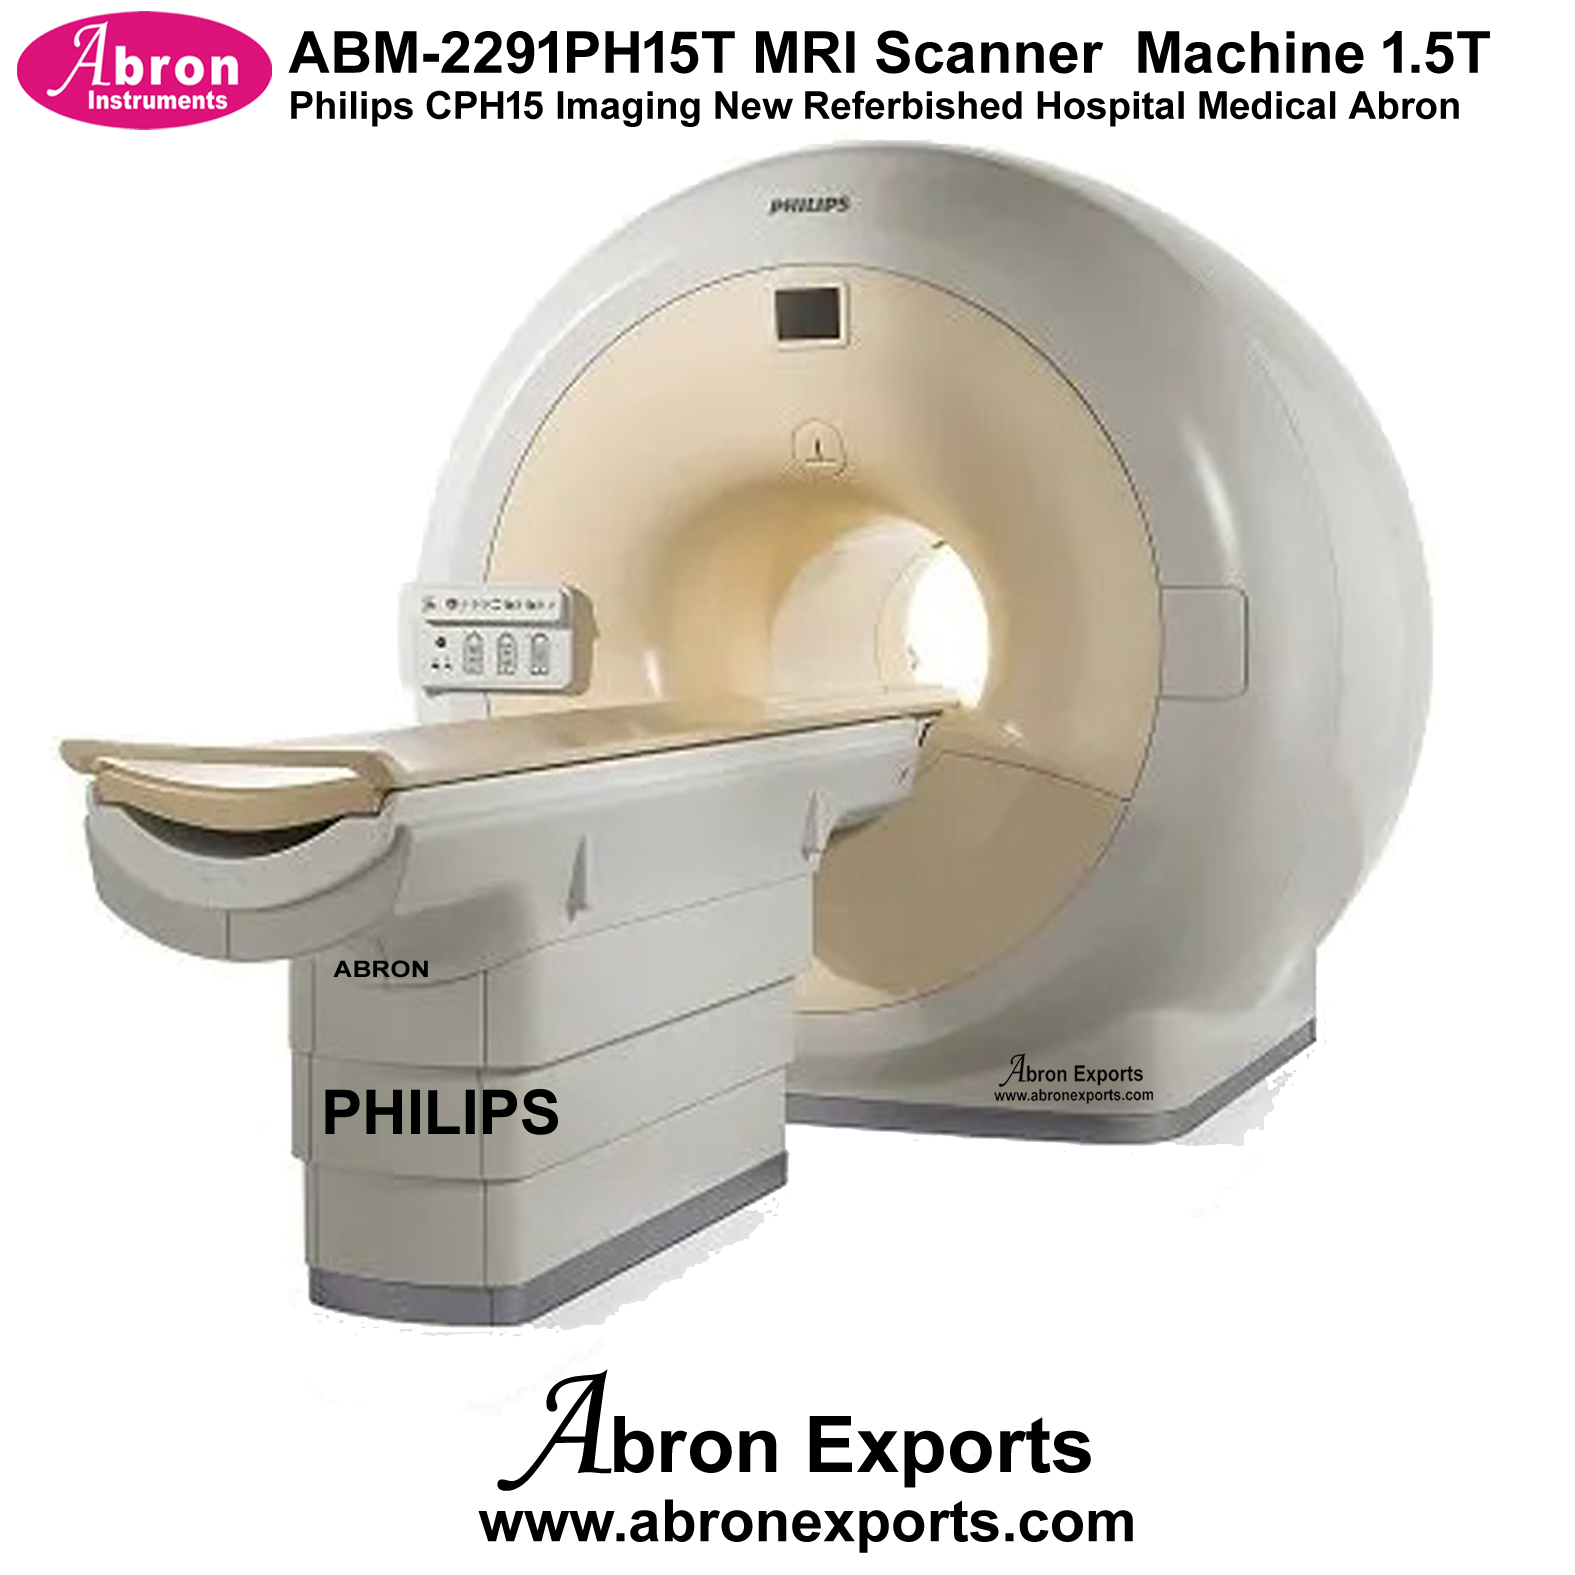 MRI Scanner  Machine 1.5T Philips CPH15 Imaging New Referbished Hospital Medical Abron ABM-2291PH15T